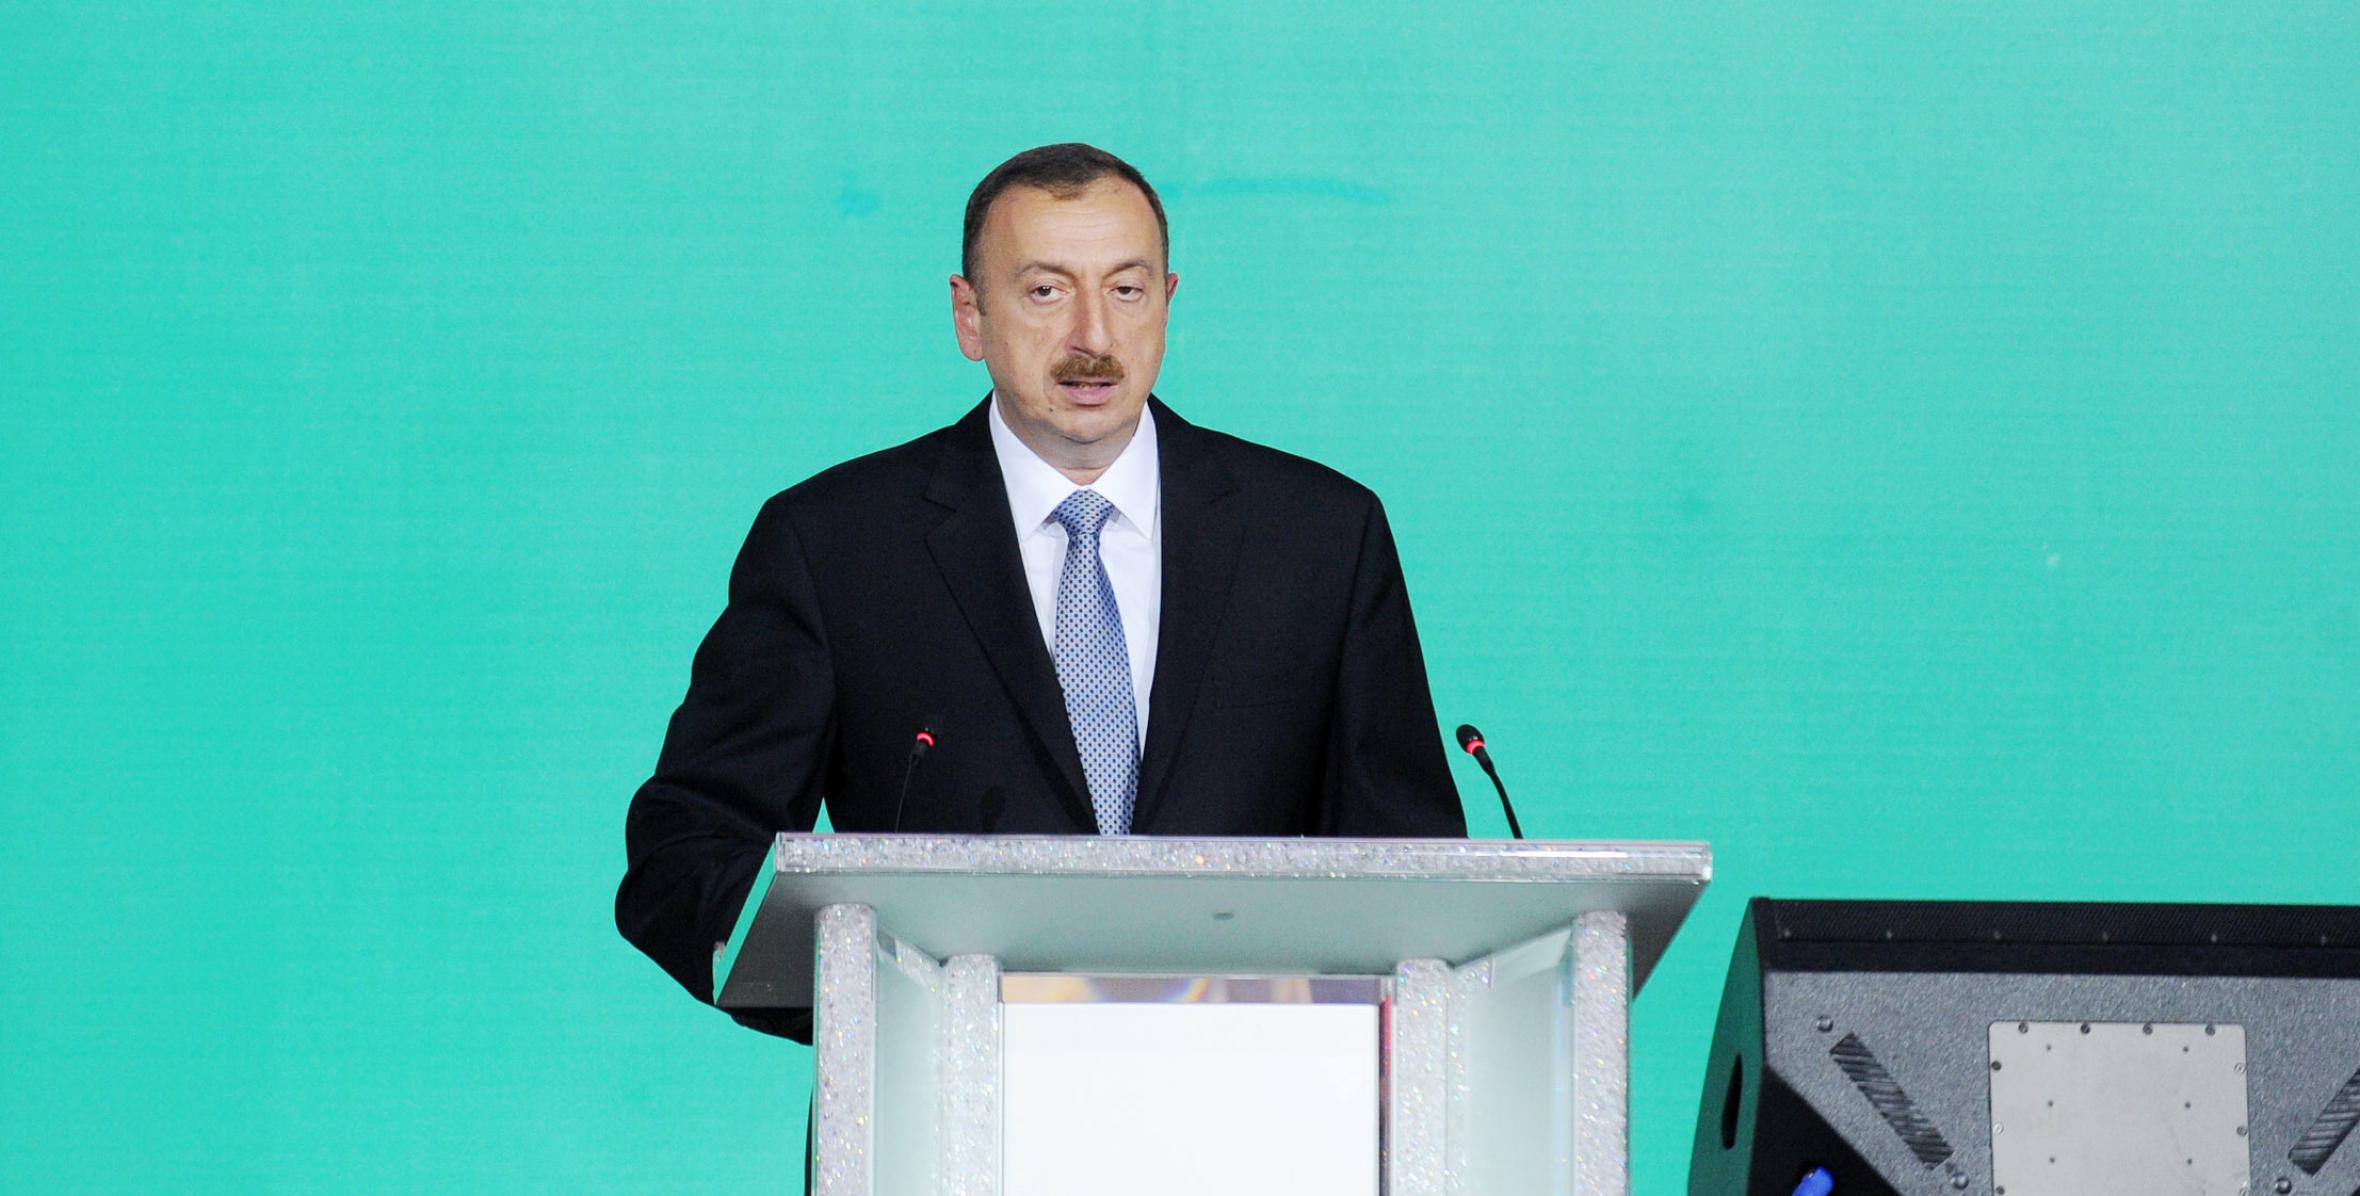 Speech by Ilham Aliyev at the official reception marking 28 May – the Republic Day